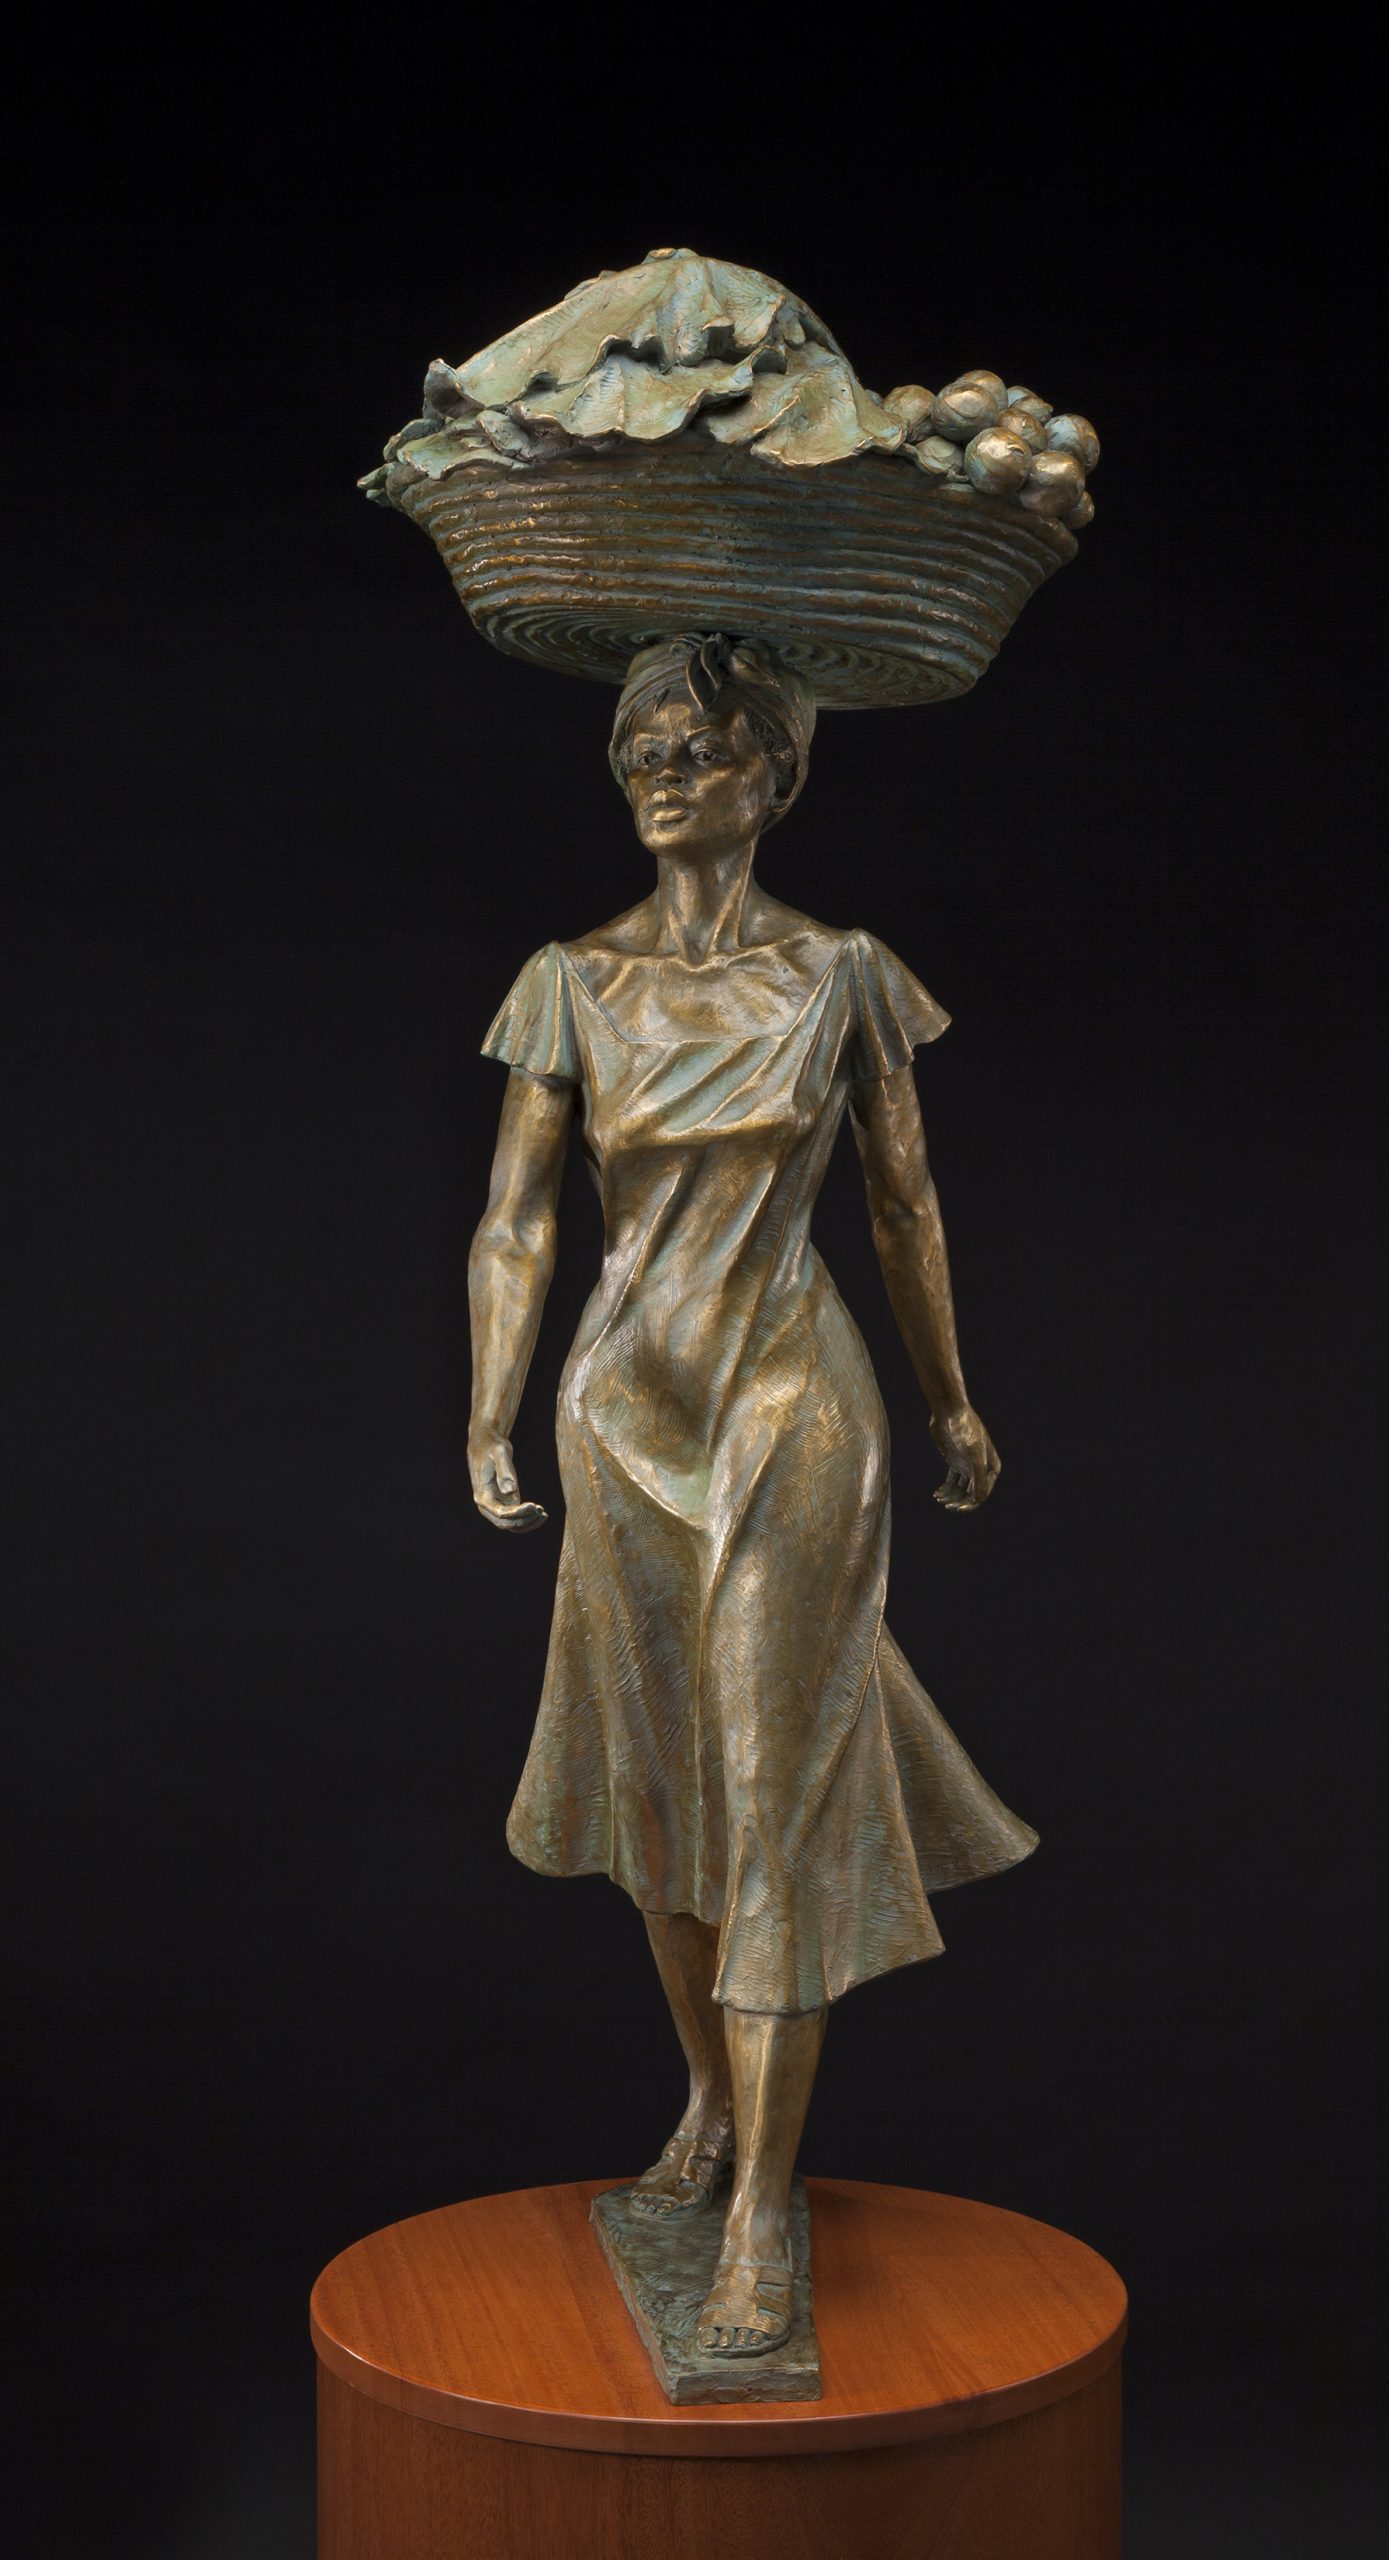 On the Way to the Market
by Alex Palkovich, NSS
Bronze
79